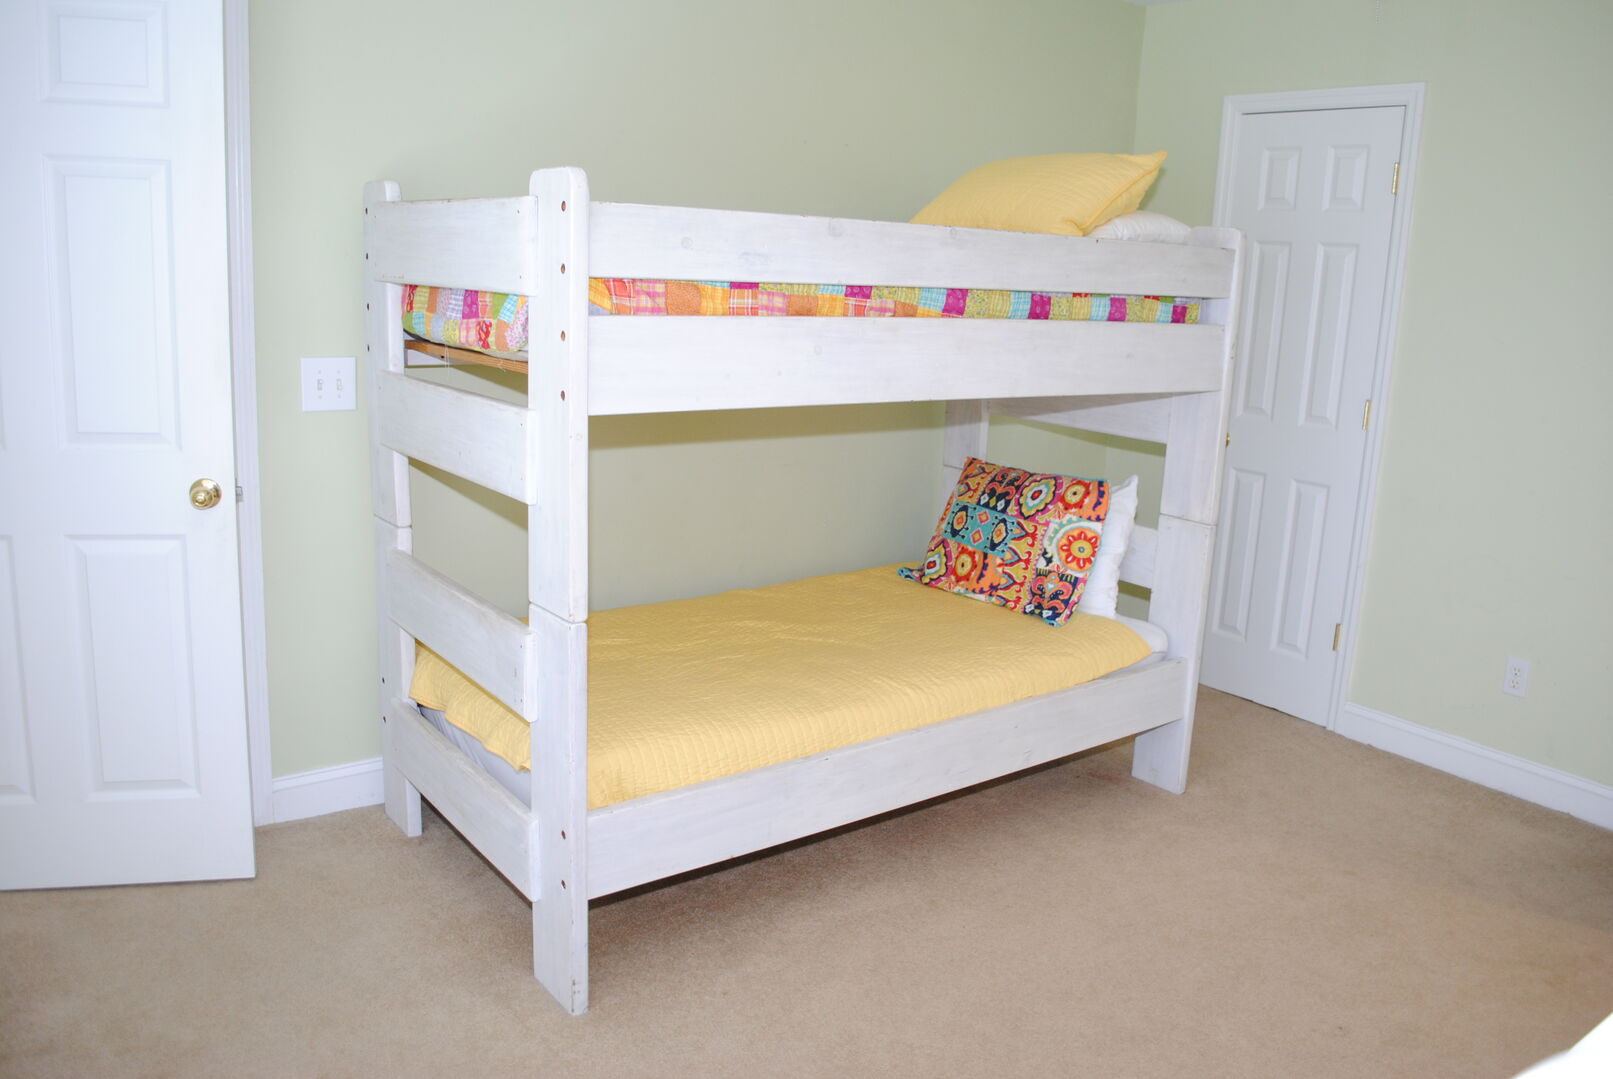 2 Sets of Bunk Beds (1 Full, 3 Twins) - Second Floor